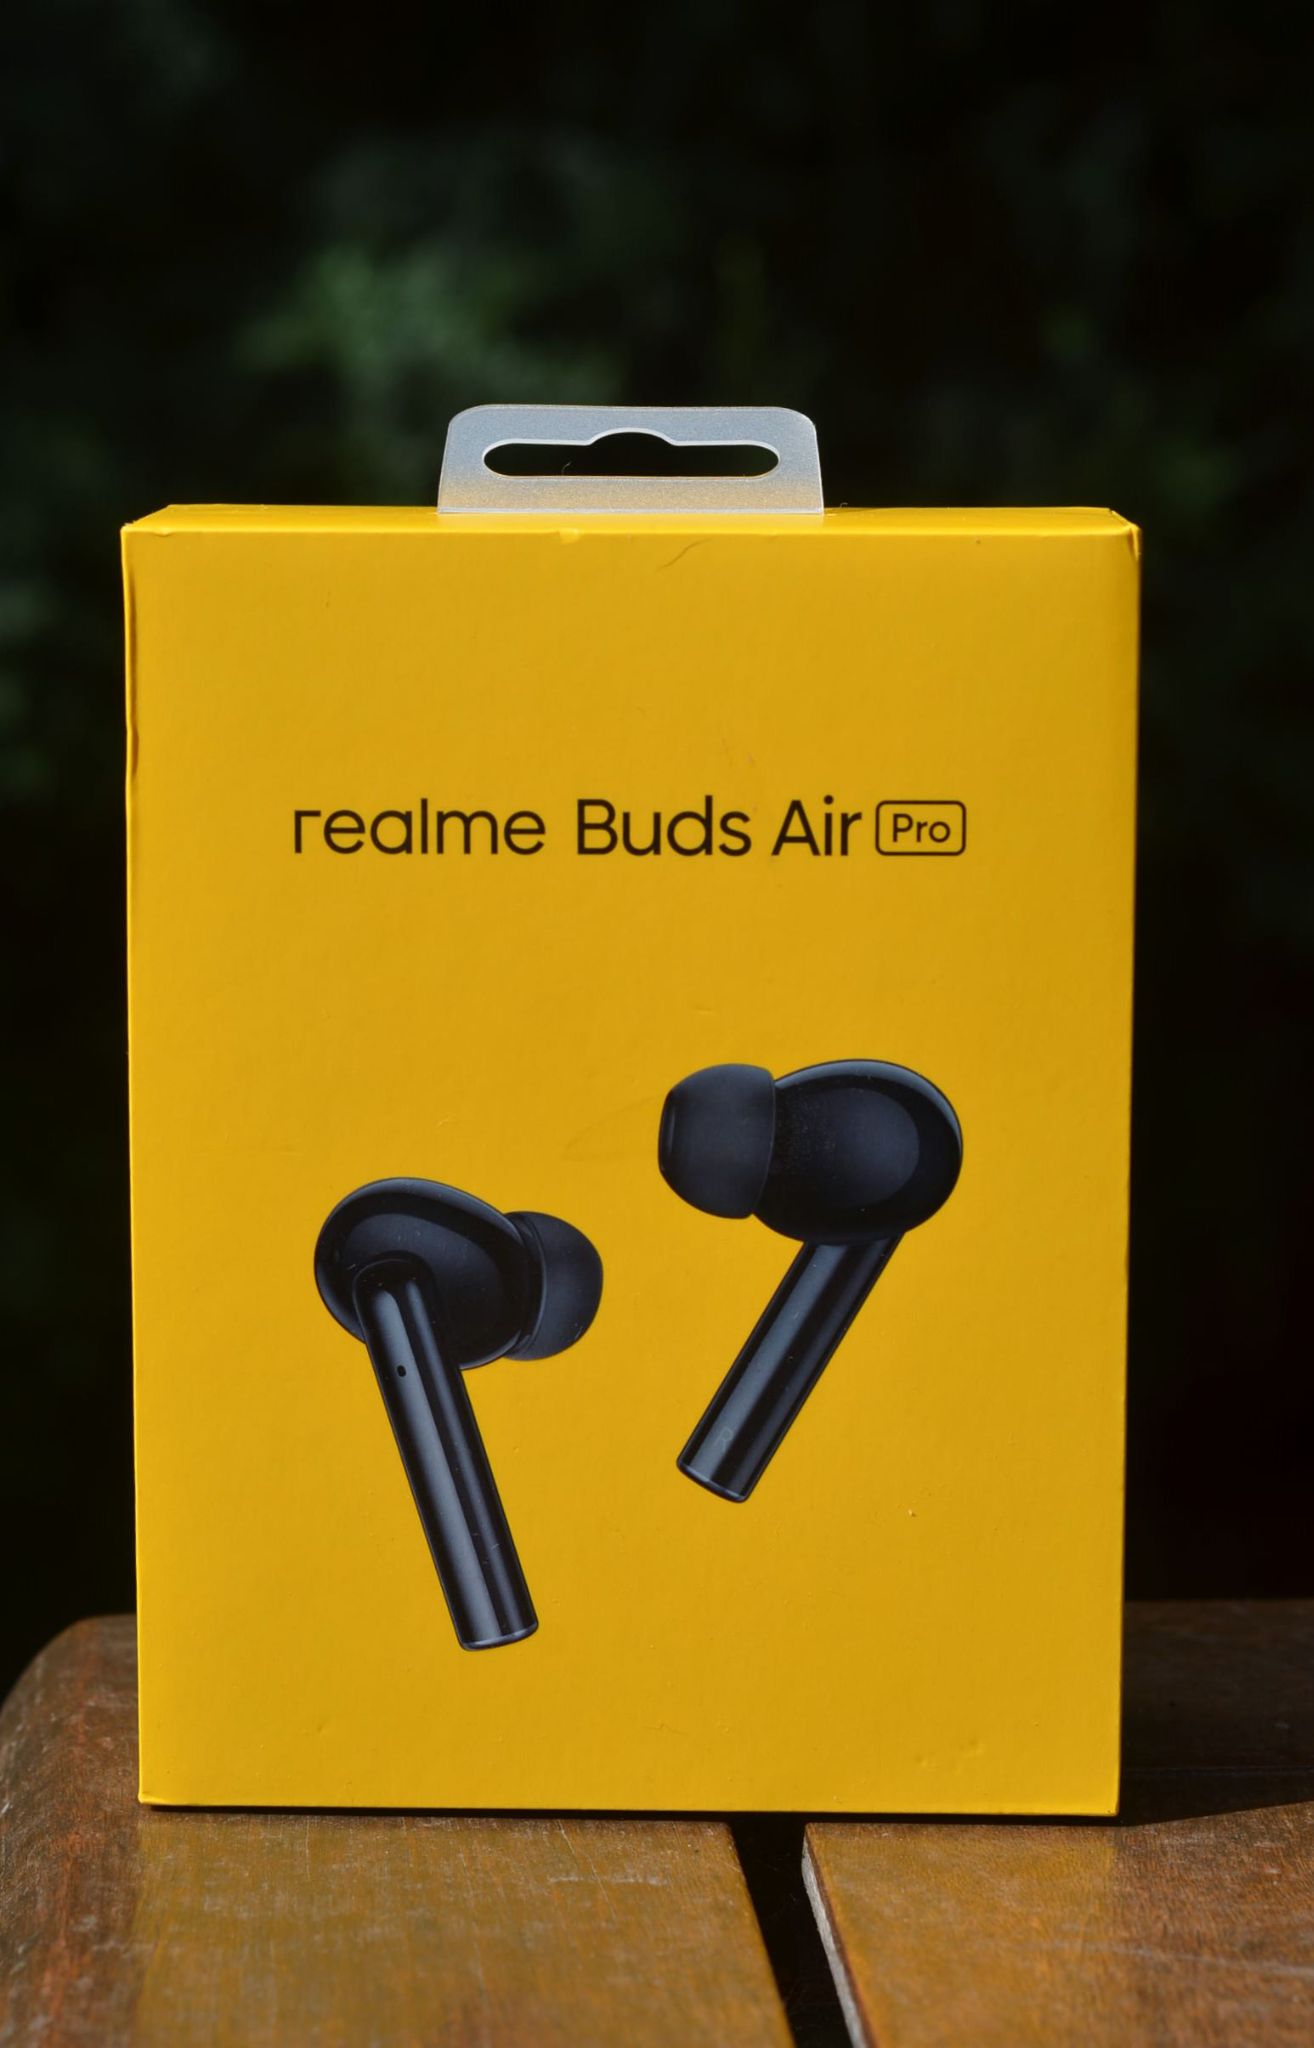 Are the realme Buds Air Pro really Pro?